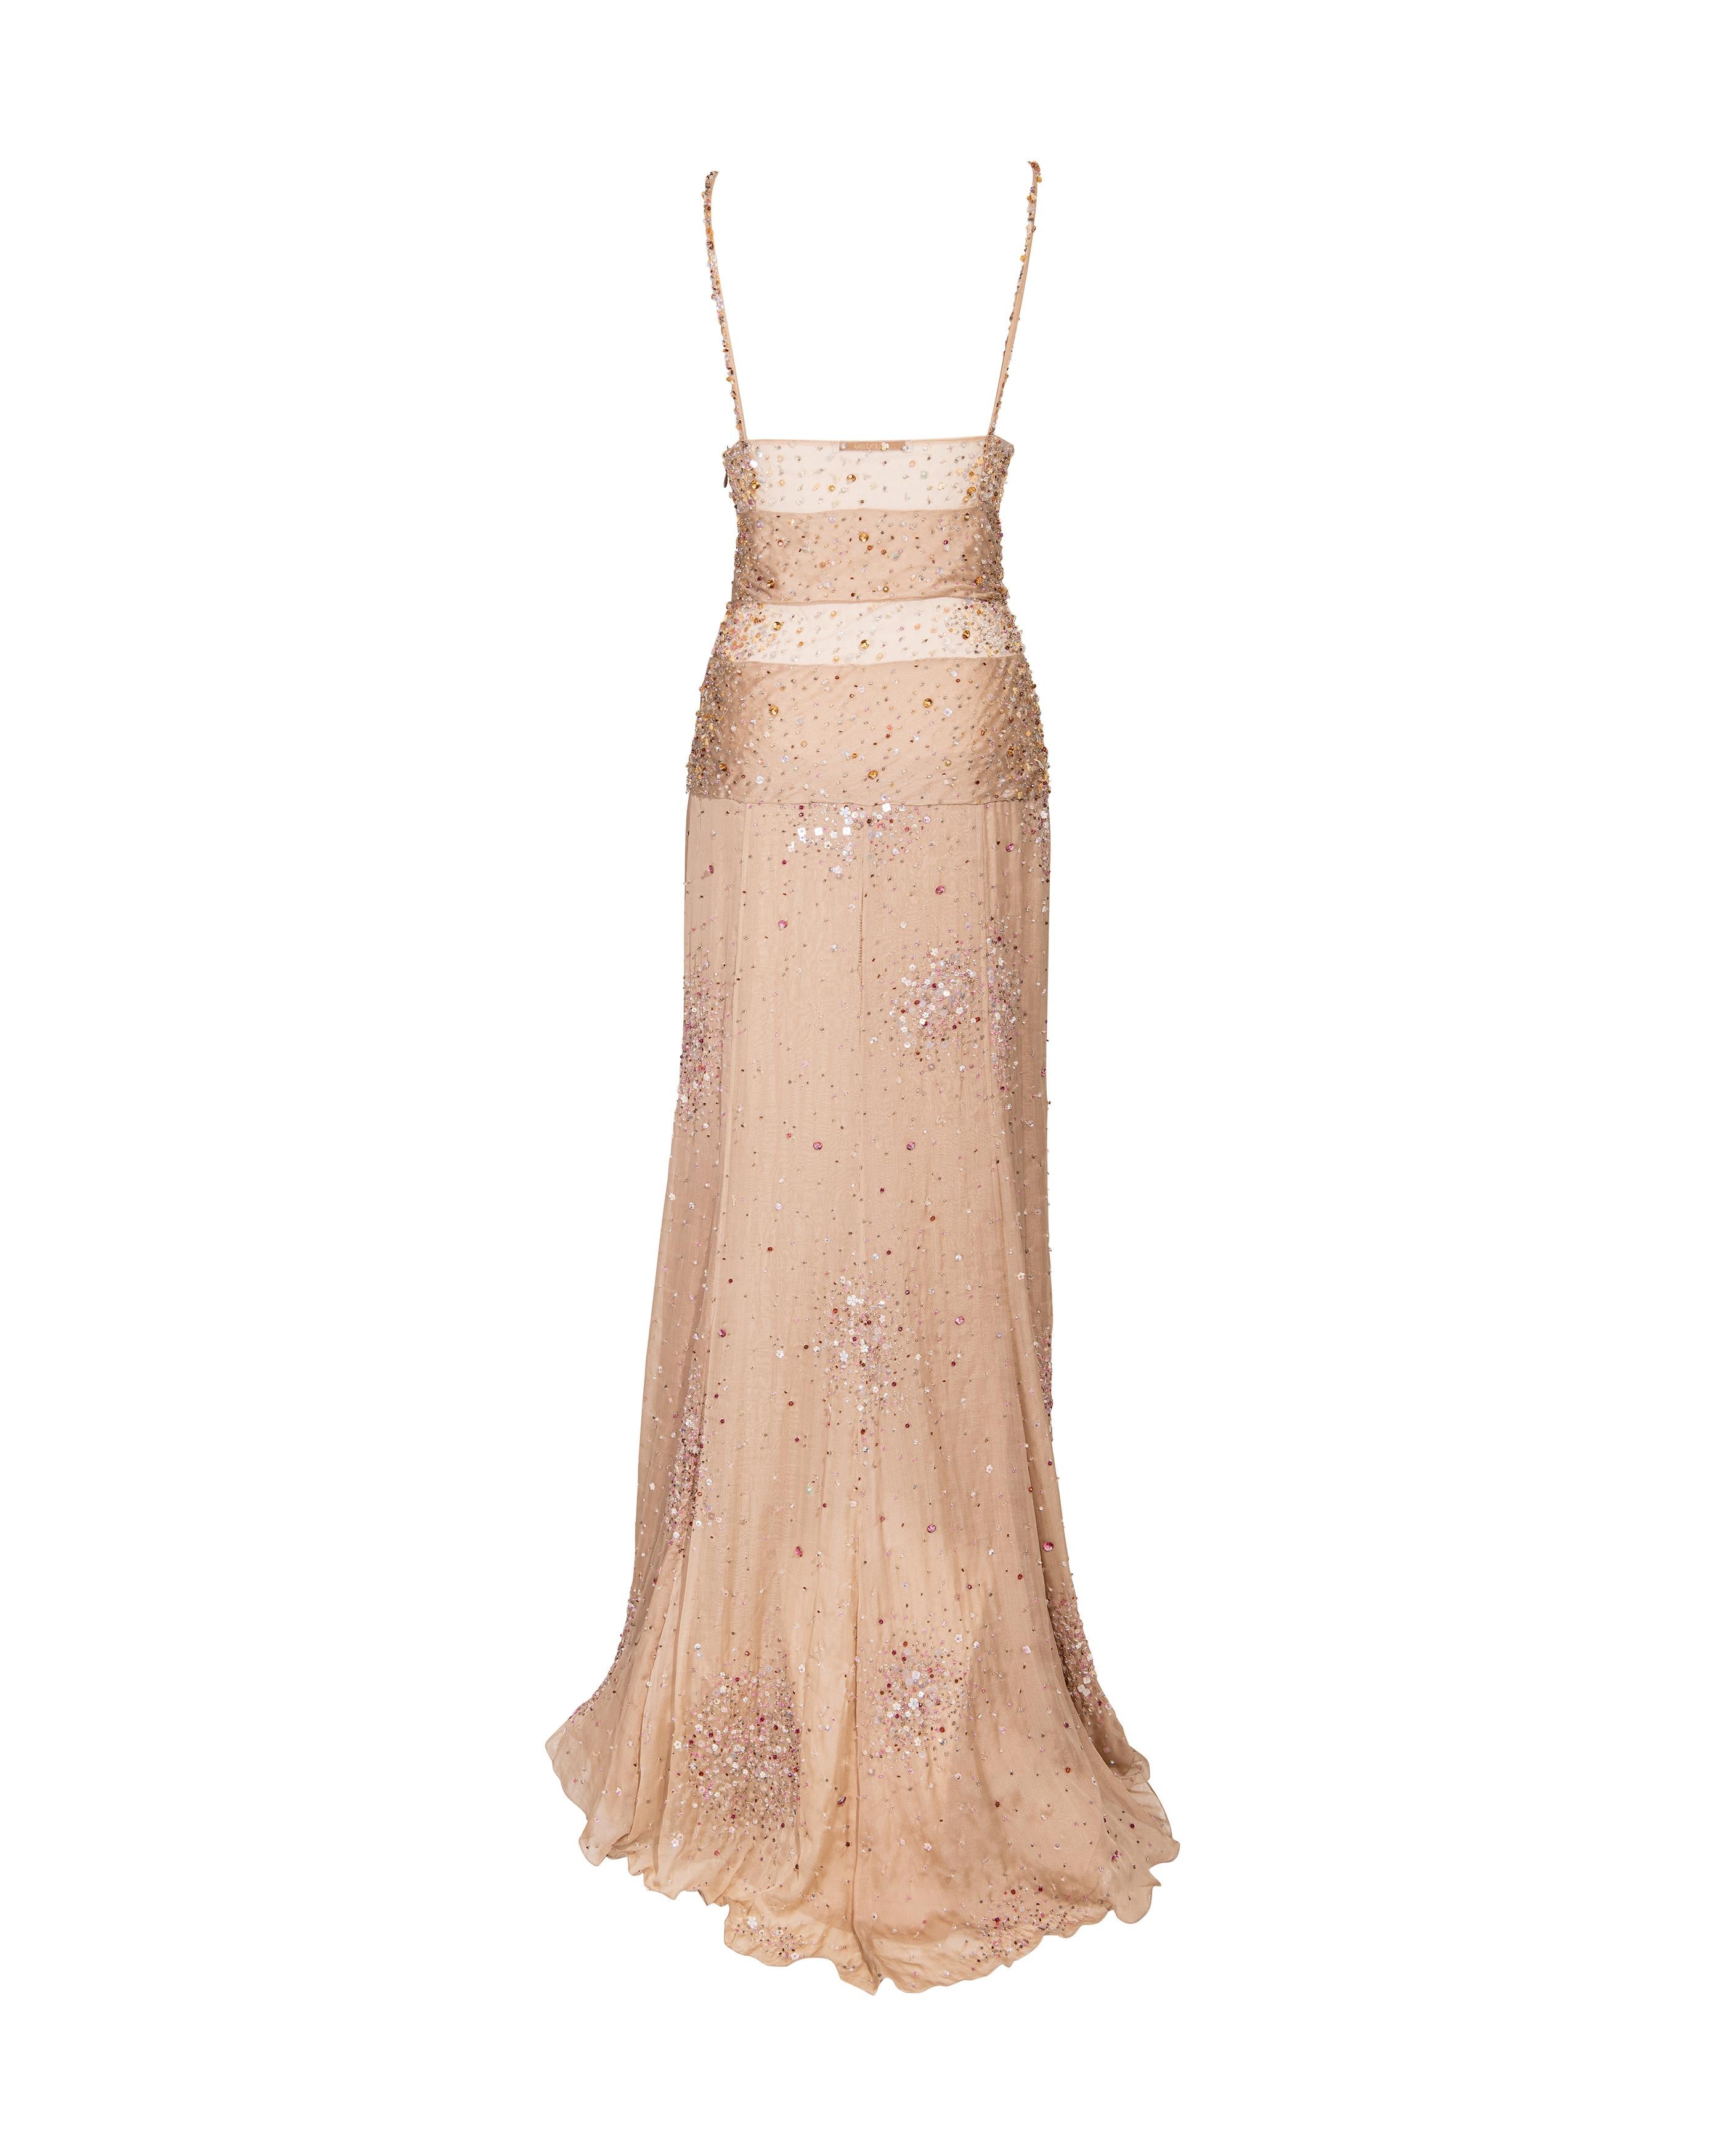 S/S 2001 Valentino Mesh and Silk Tan Embellished Gown 1